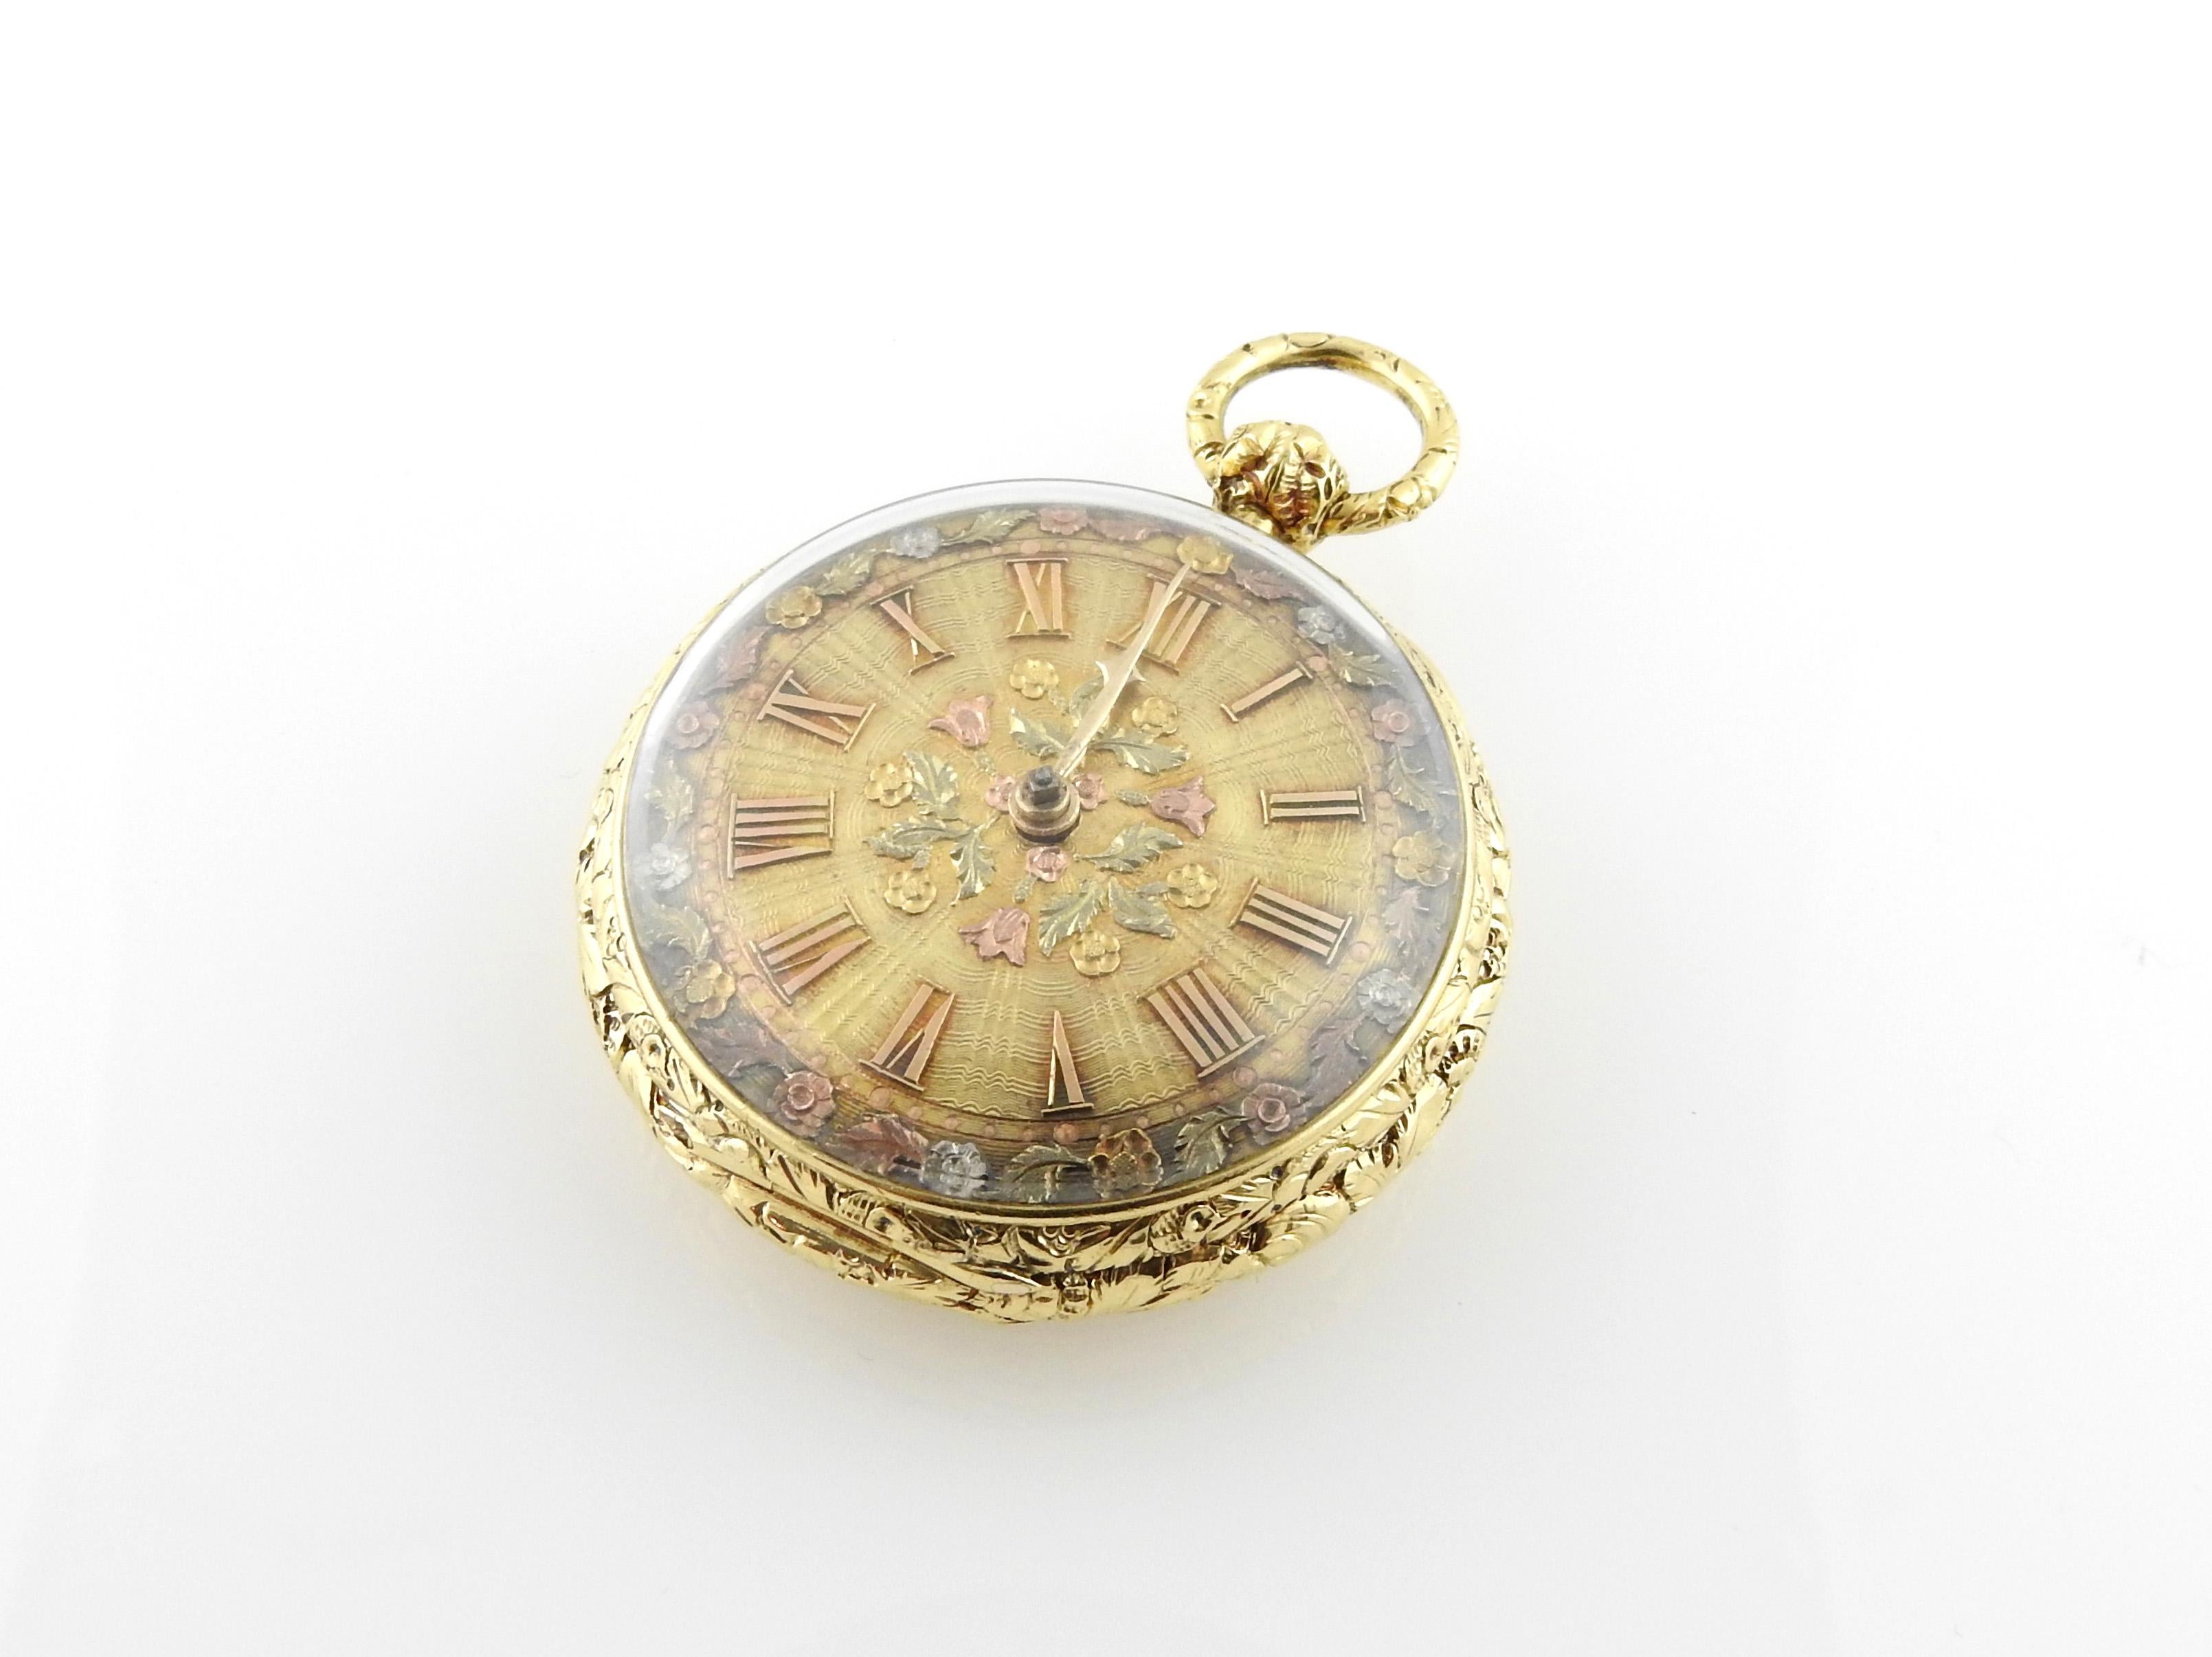 Verge Crown Wheel Key Winding 18K Yellow Gold Ornate Pocket Watch

Approx. 48 mm in diameter, 18 mm thick

Stamped SH JW with English Gold Hallmarks inside the case. Date mark of F with square box around it. 

61.3 dwt / 95.4g 

The verge (or crown